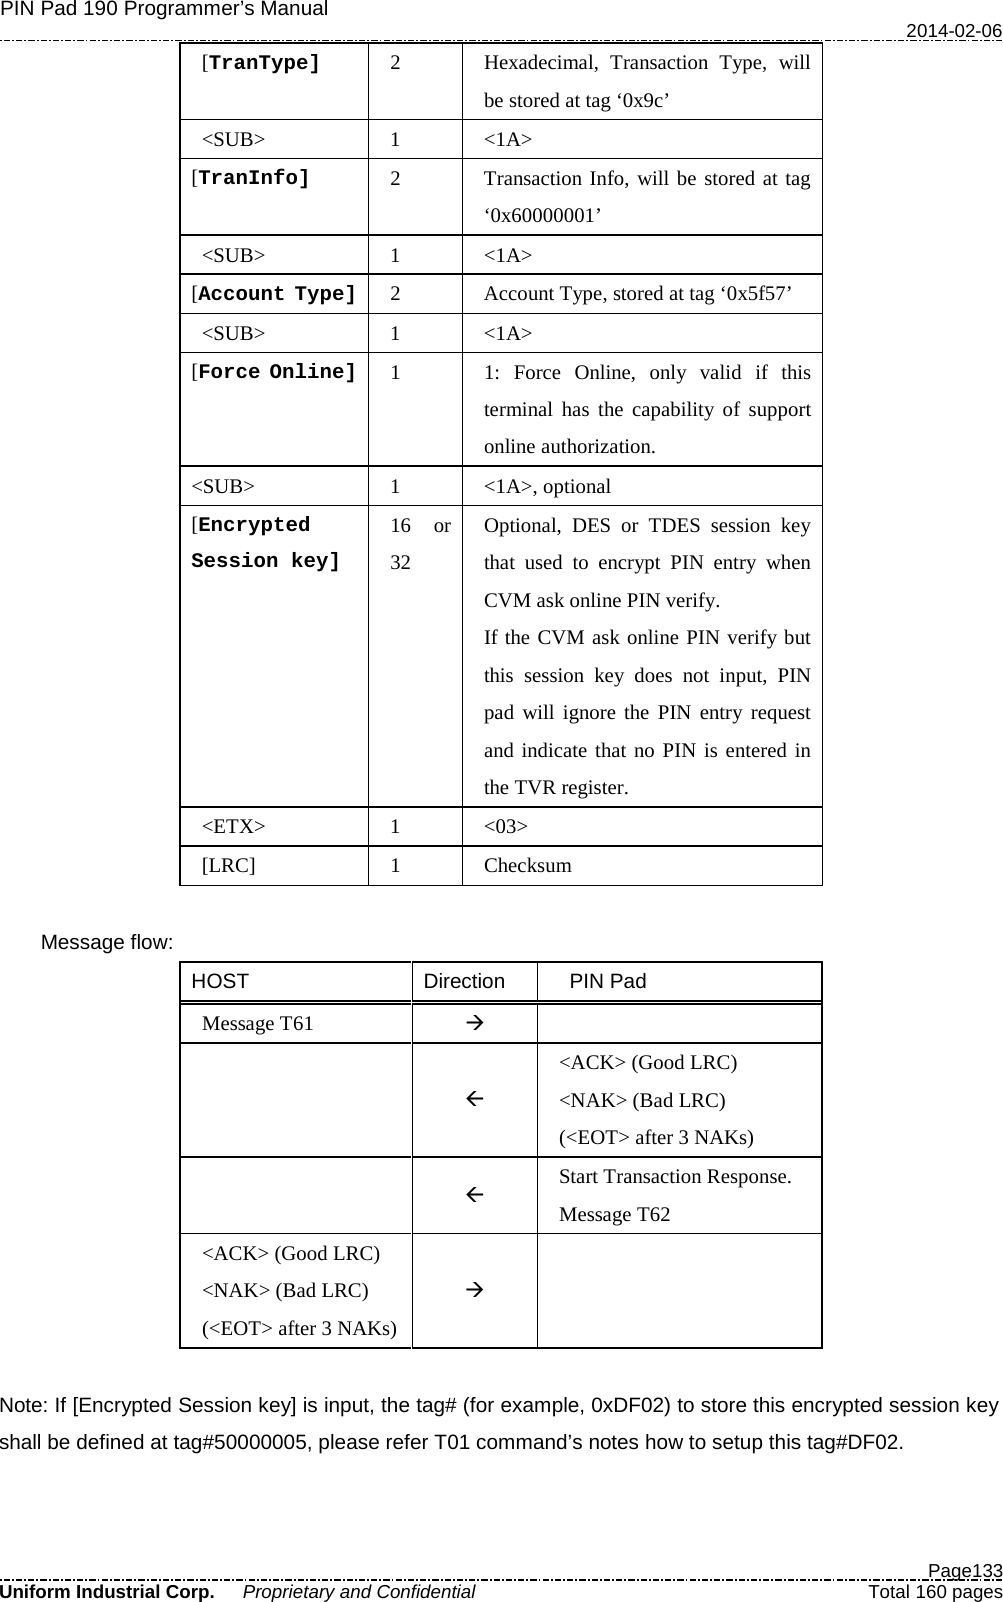 PIN Pad 190 Programmer’s Manual   2014-02-06  Page133 Uniform Industrial Corp. Proprietary and Confidential  Total 160 pages [TranType] 2 Hexadecimal, Transaction Type, will be stored at tag ‘0x9c’ &lt;SUB&gt;  1  &lt;1A&gt; [TranInfo] 2  Transaction Info, will be stored at tag ‘0x60000001’ &lt;SUB&gt;  1  &lt;1A&gt; [Account Type] 2  Account Type, stored at tag ‘0x5f57’ &lt;SUB&gt;  1  &lt;1A&gt; [Force Online] 1 1: Force Online, only valid if this terminal has the capability of support online authorization. &lt;SUB&gt;  1  &lt;1A&gt;, optional [Encrypted Session key] 16 or 32 Optional, DES or TDES session key  that used to encrypt PIN entry when CVM ask online PIN verify. If the CVM ask online PIN verify but this session key does not input, PIN pad will ignore the PIN entry request and indicate that no PIN is entered in the TVR register.   &lt;ETX&gt;  1  &lt;03&gt; [LRC]  1  Checksum  Message flow: HOST Direction   PIN Pad Message T61      &lt;ACK&gt; (Good LRC) &lt;NAK&gt; (Bad LRC) (&lt;EOT&gt; after 3 NAKs)   Start Transaction Response. Message T62 &lt;ACK&gt; (Good LRC) &lt;NAK&gt; (Bad LRC) (&lt;EOT&gt; after 3 NAKs)    Note: If [Encrypted Session key] is input, the tag# (for example, 0xDF02) to store this encrypted session key shall be defined at tag#50000005, please refer T01 command’s notes how to setup this tag#DF02. 